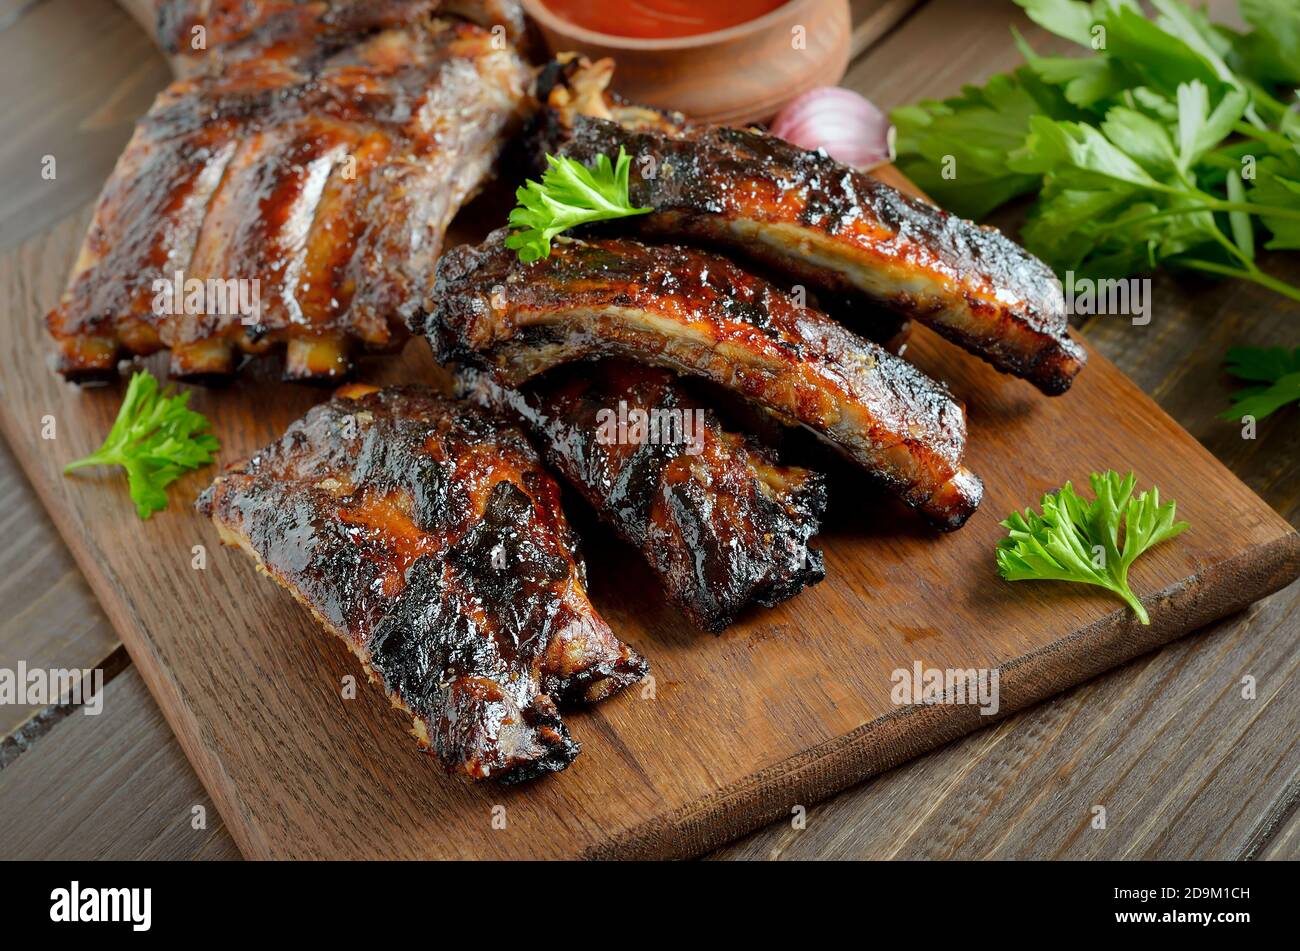 Barbecue pork ribs on cutting board, close up view Stock Photo